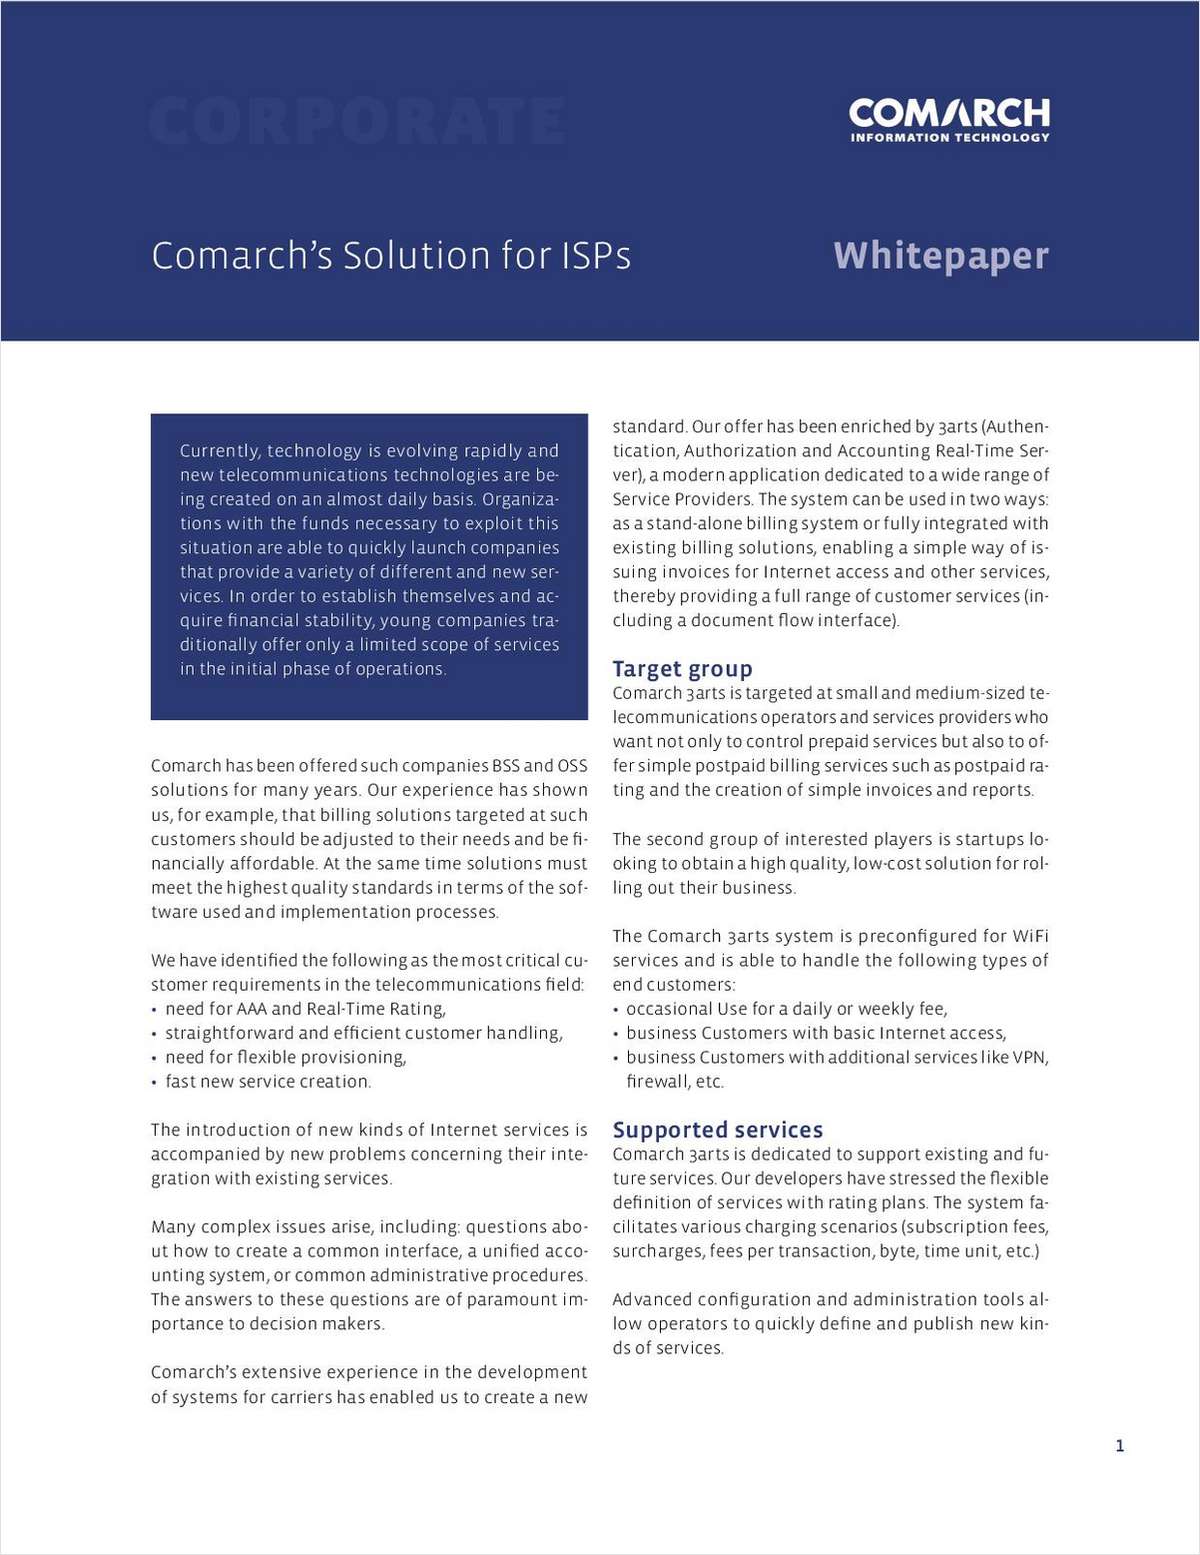 Comarch's Solution for ISPs